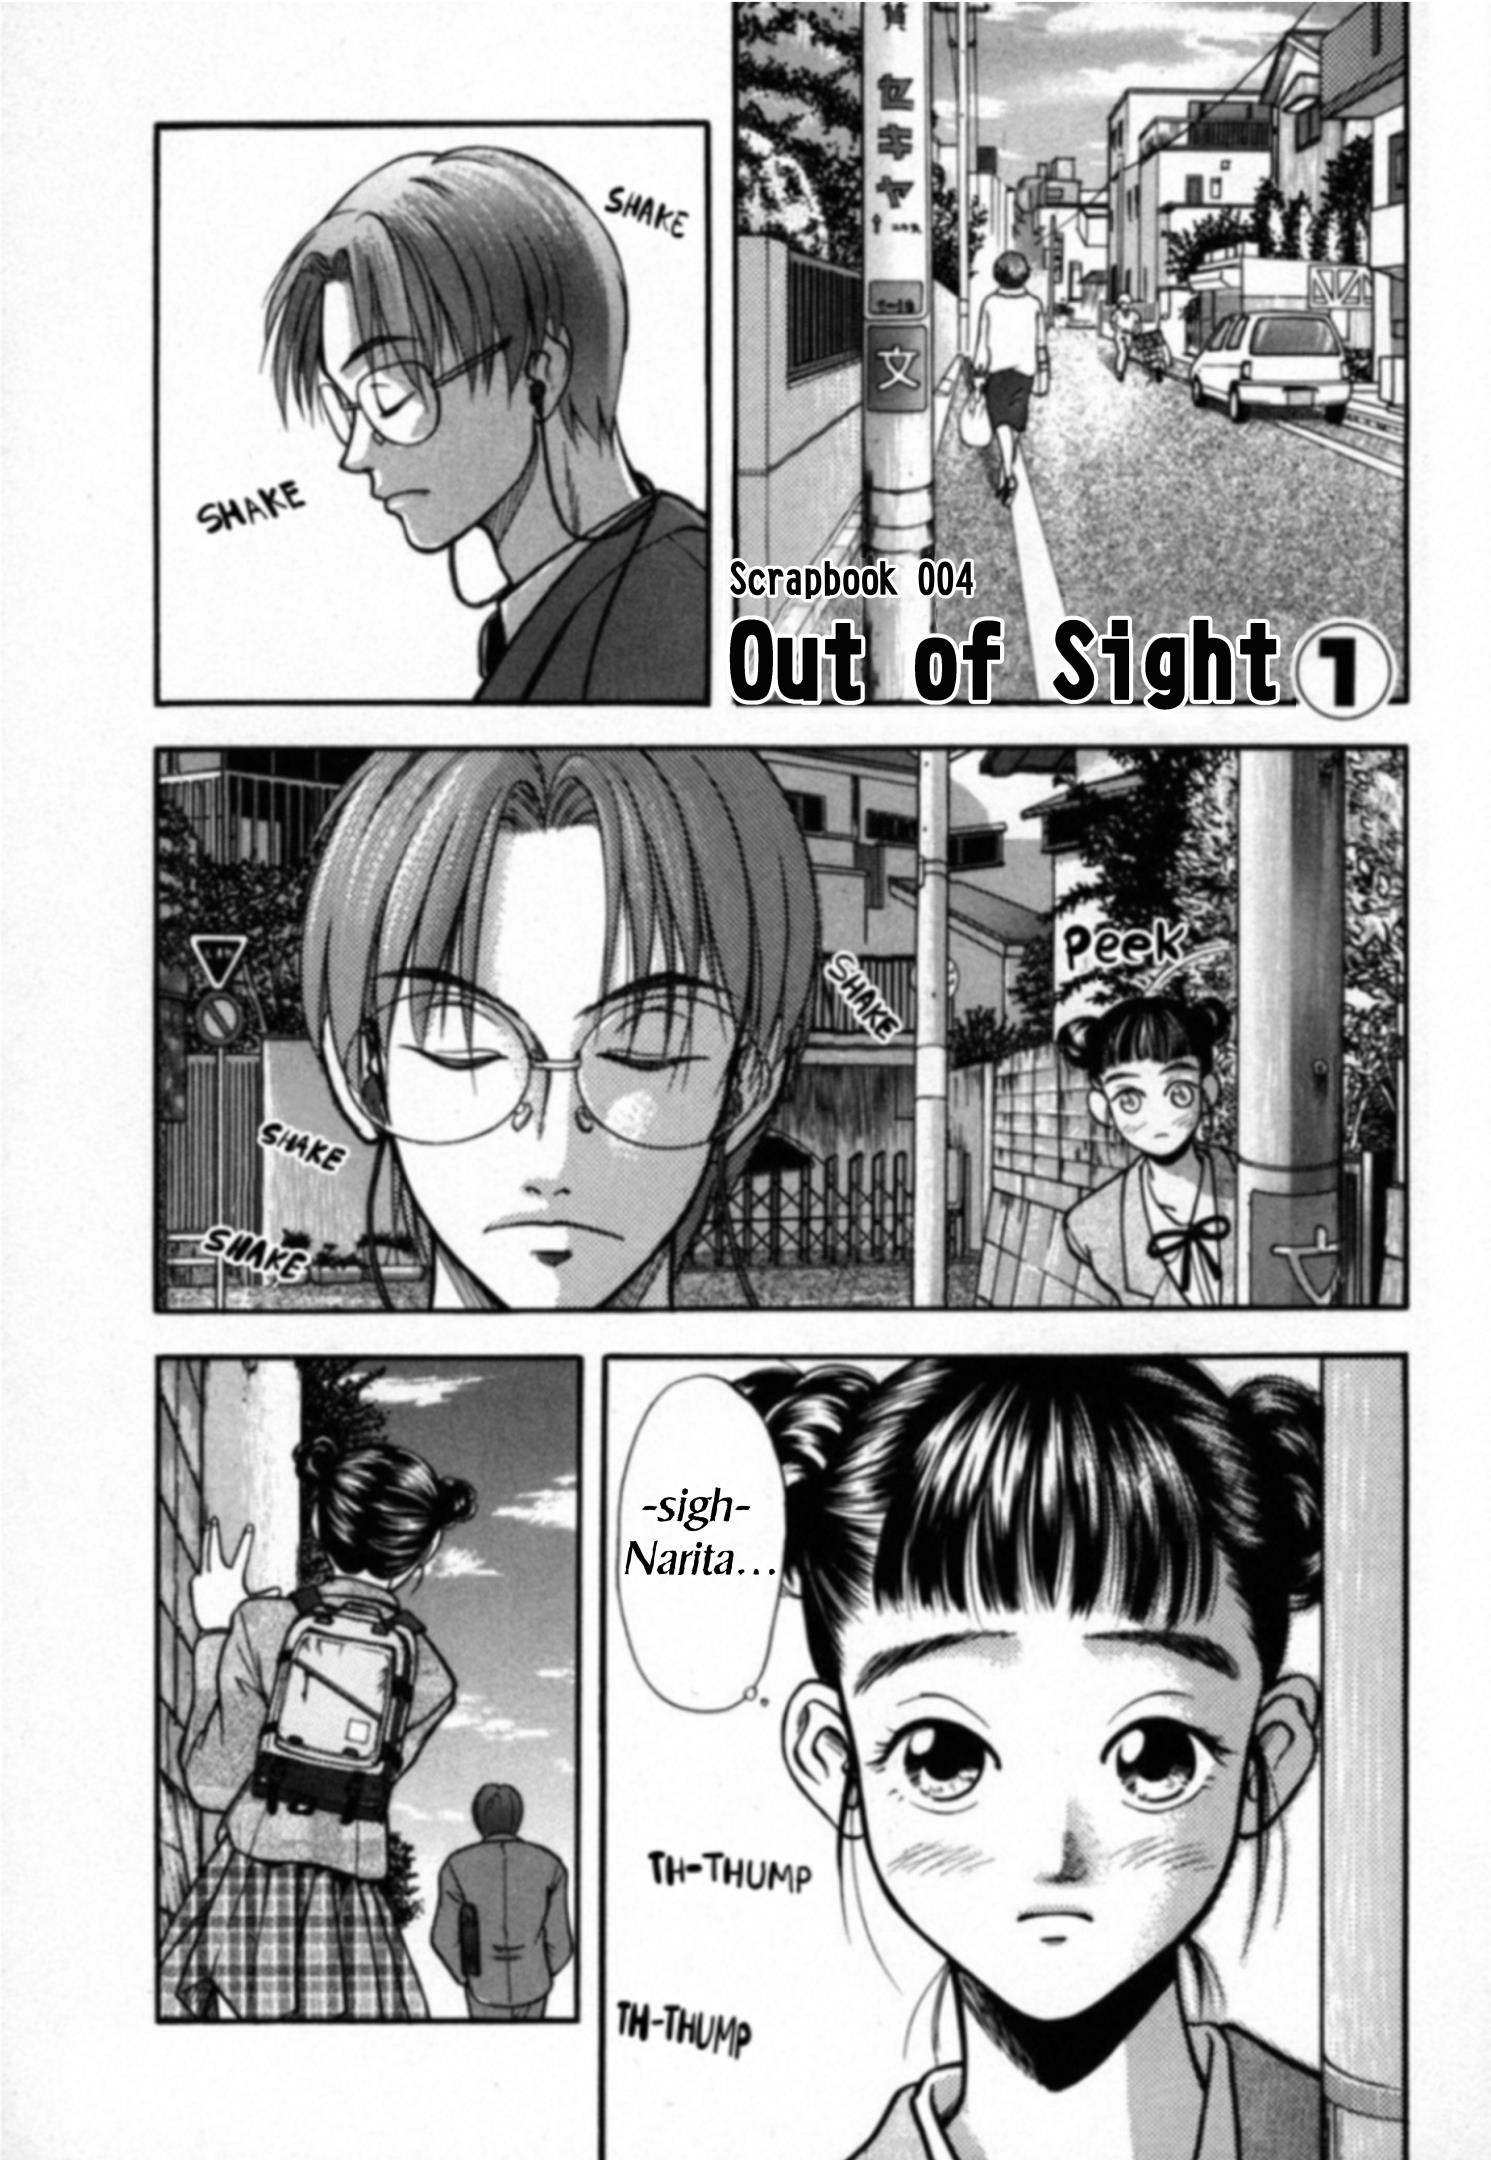 Kakeru Vol.2 Chapter 26: Out Of Sight - 1 - Picture 1